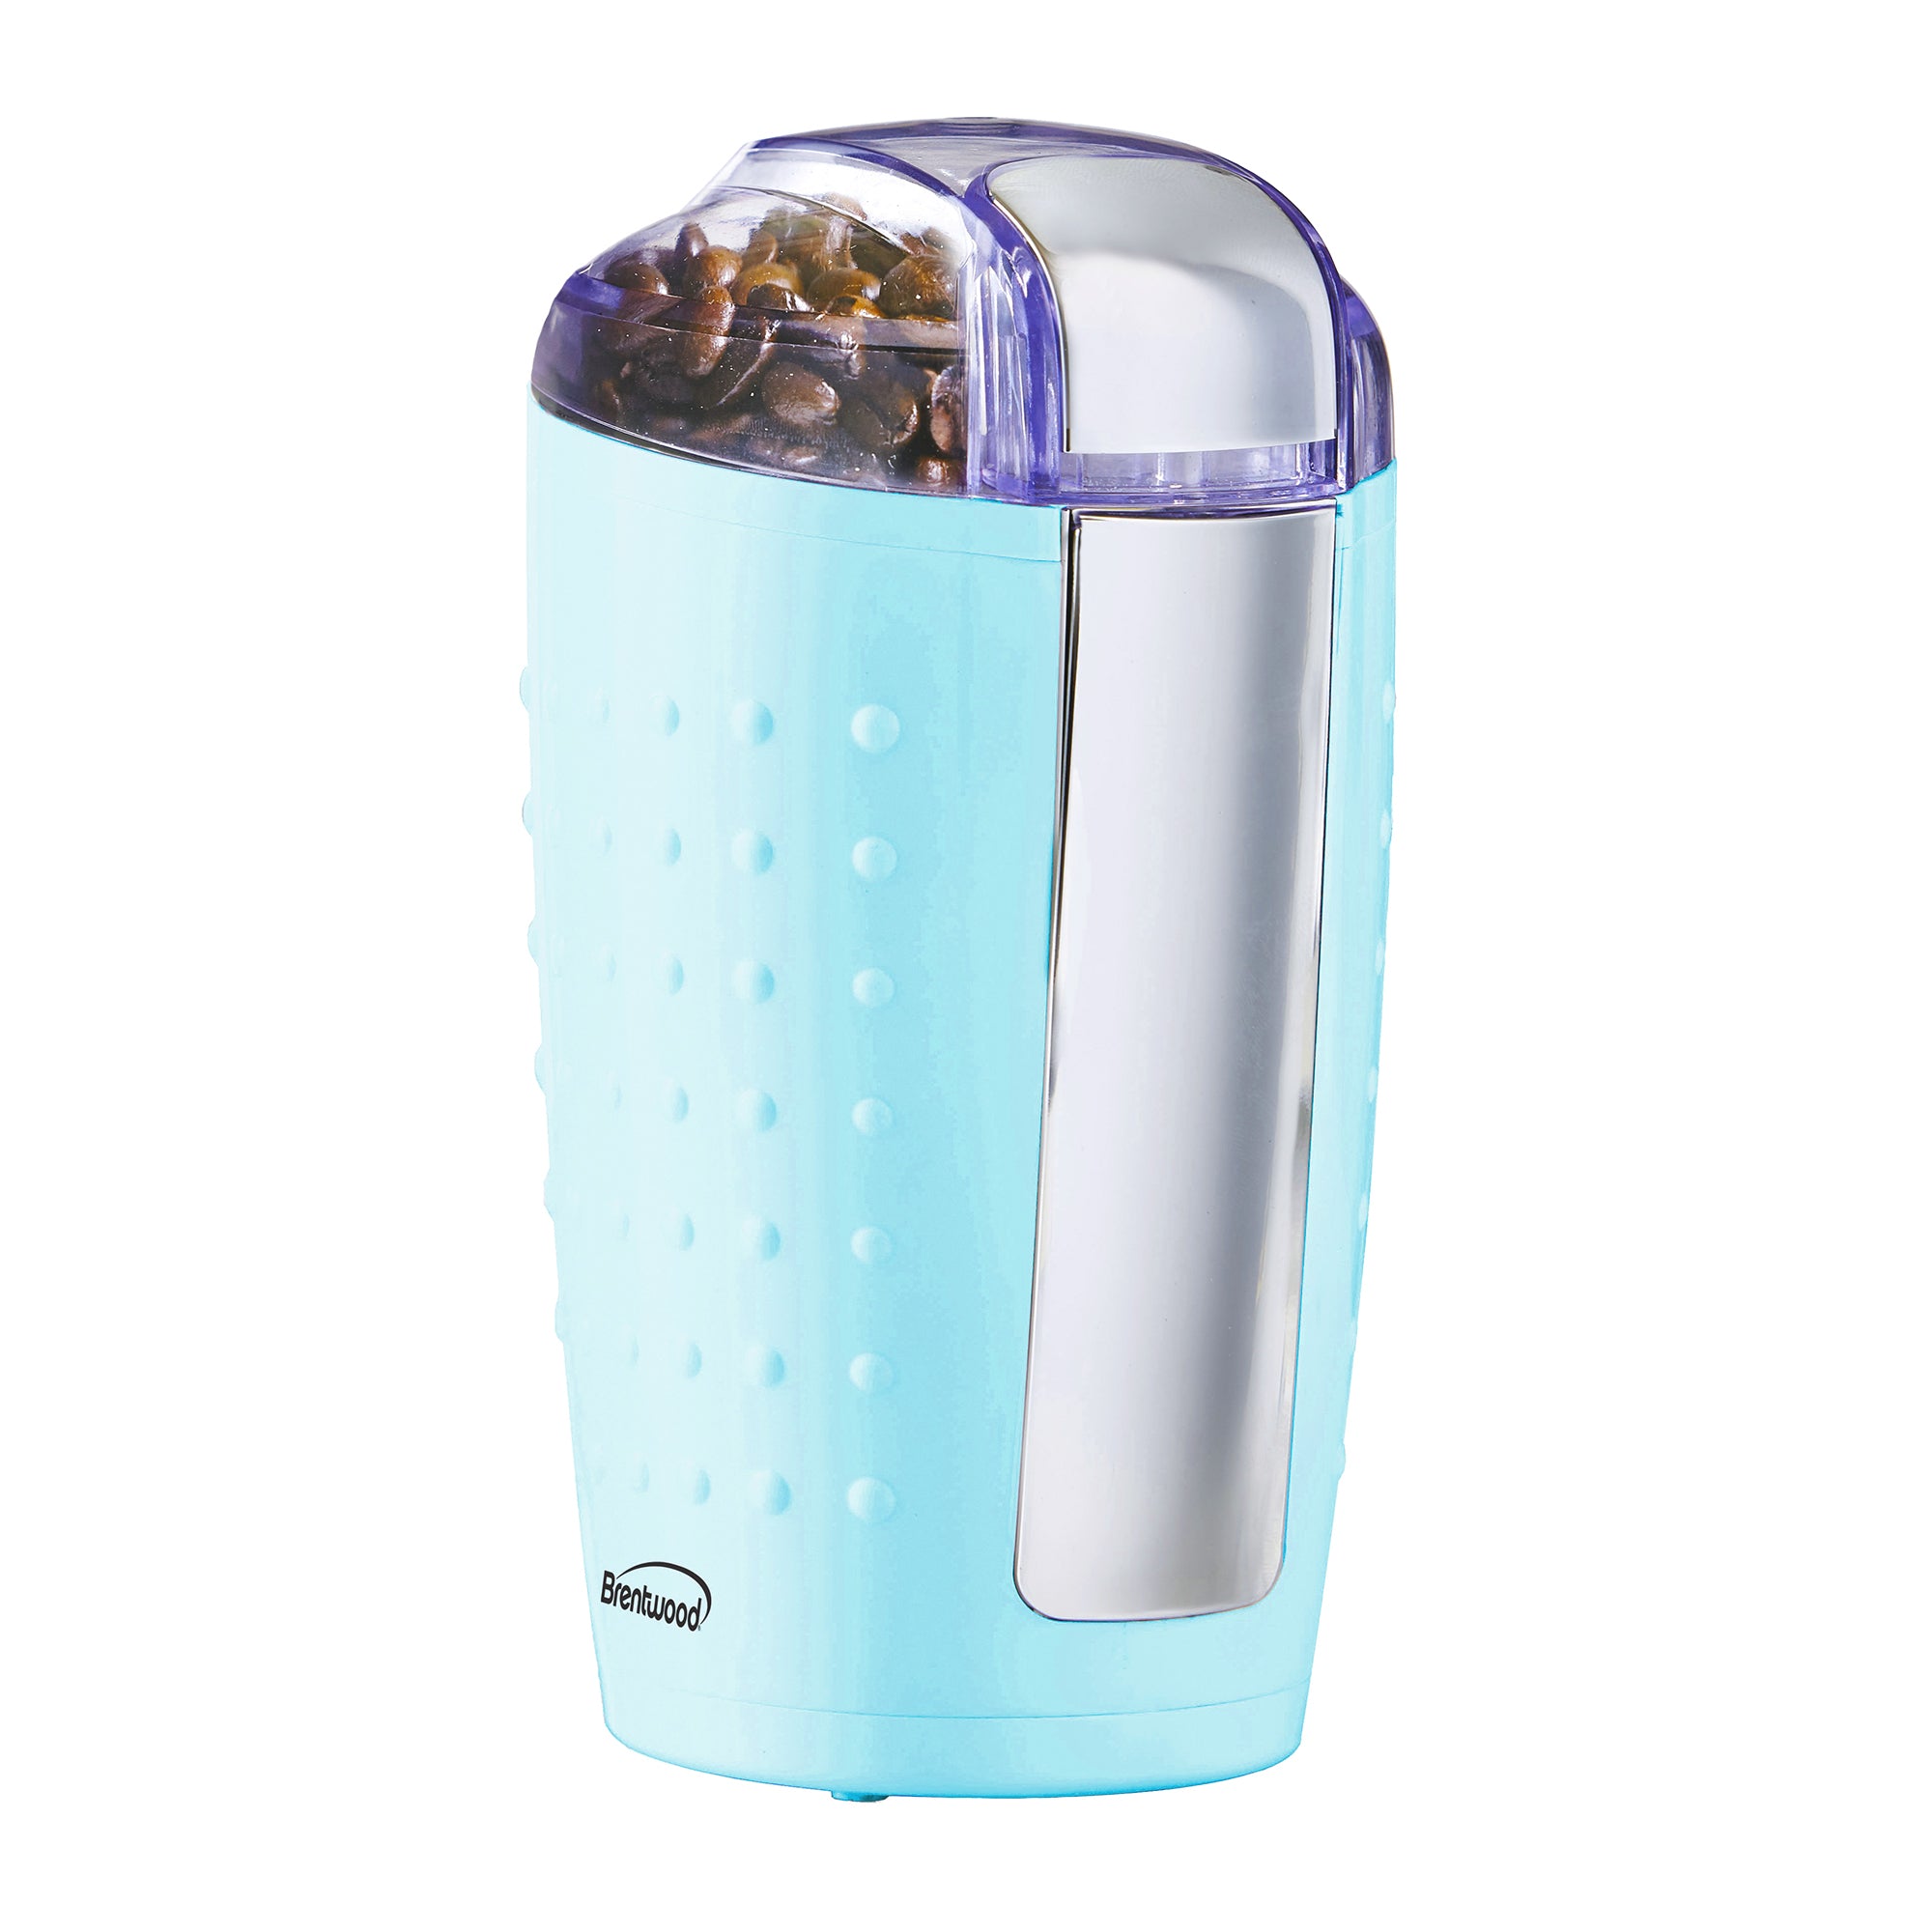 Brentwood CG-158BL 4oz Coffee and Spice Grinder, Blue